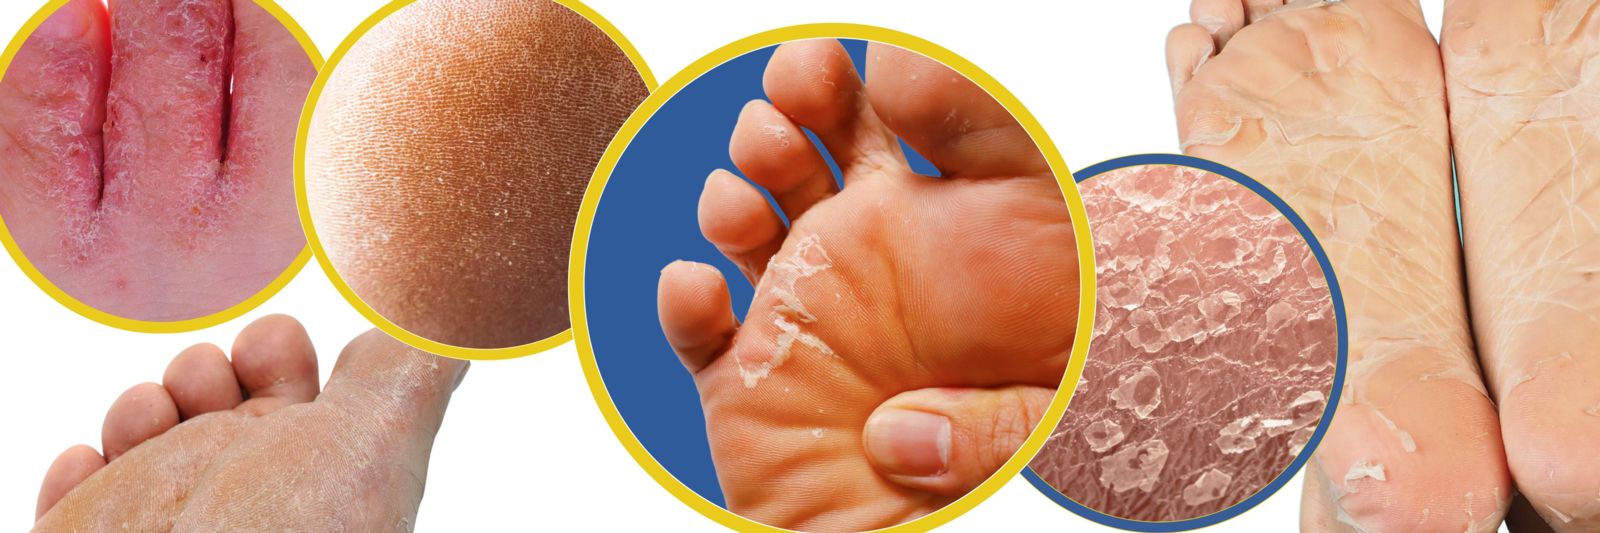 Red Spots on Feet: Athlete's Foot, Psoriasis, Other Causes